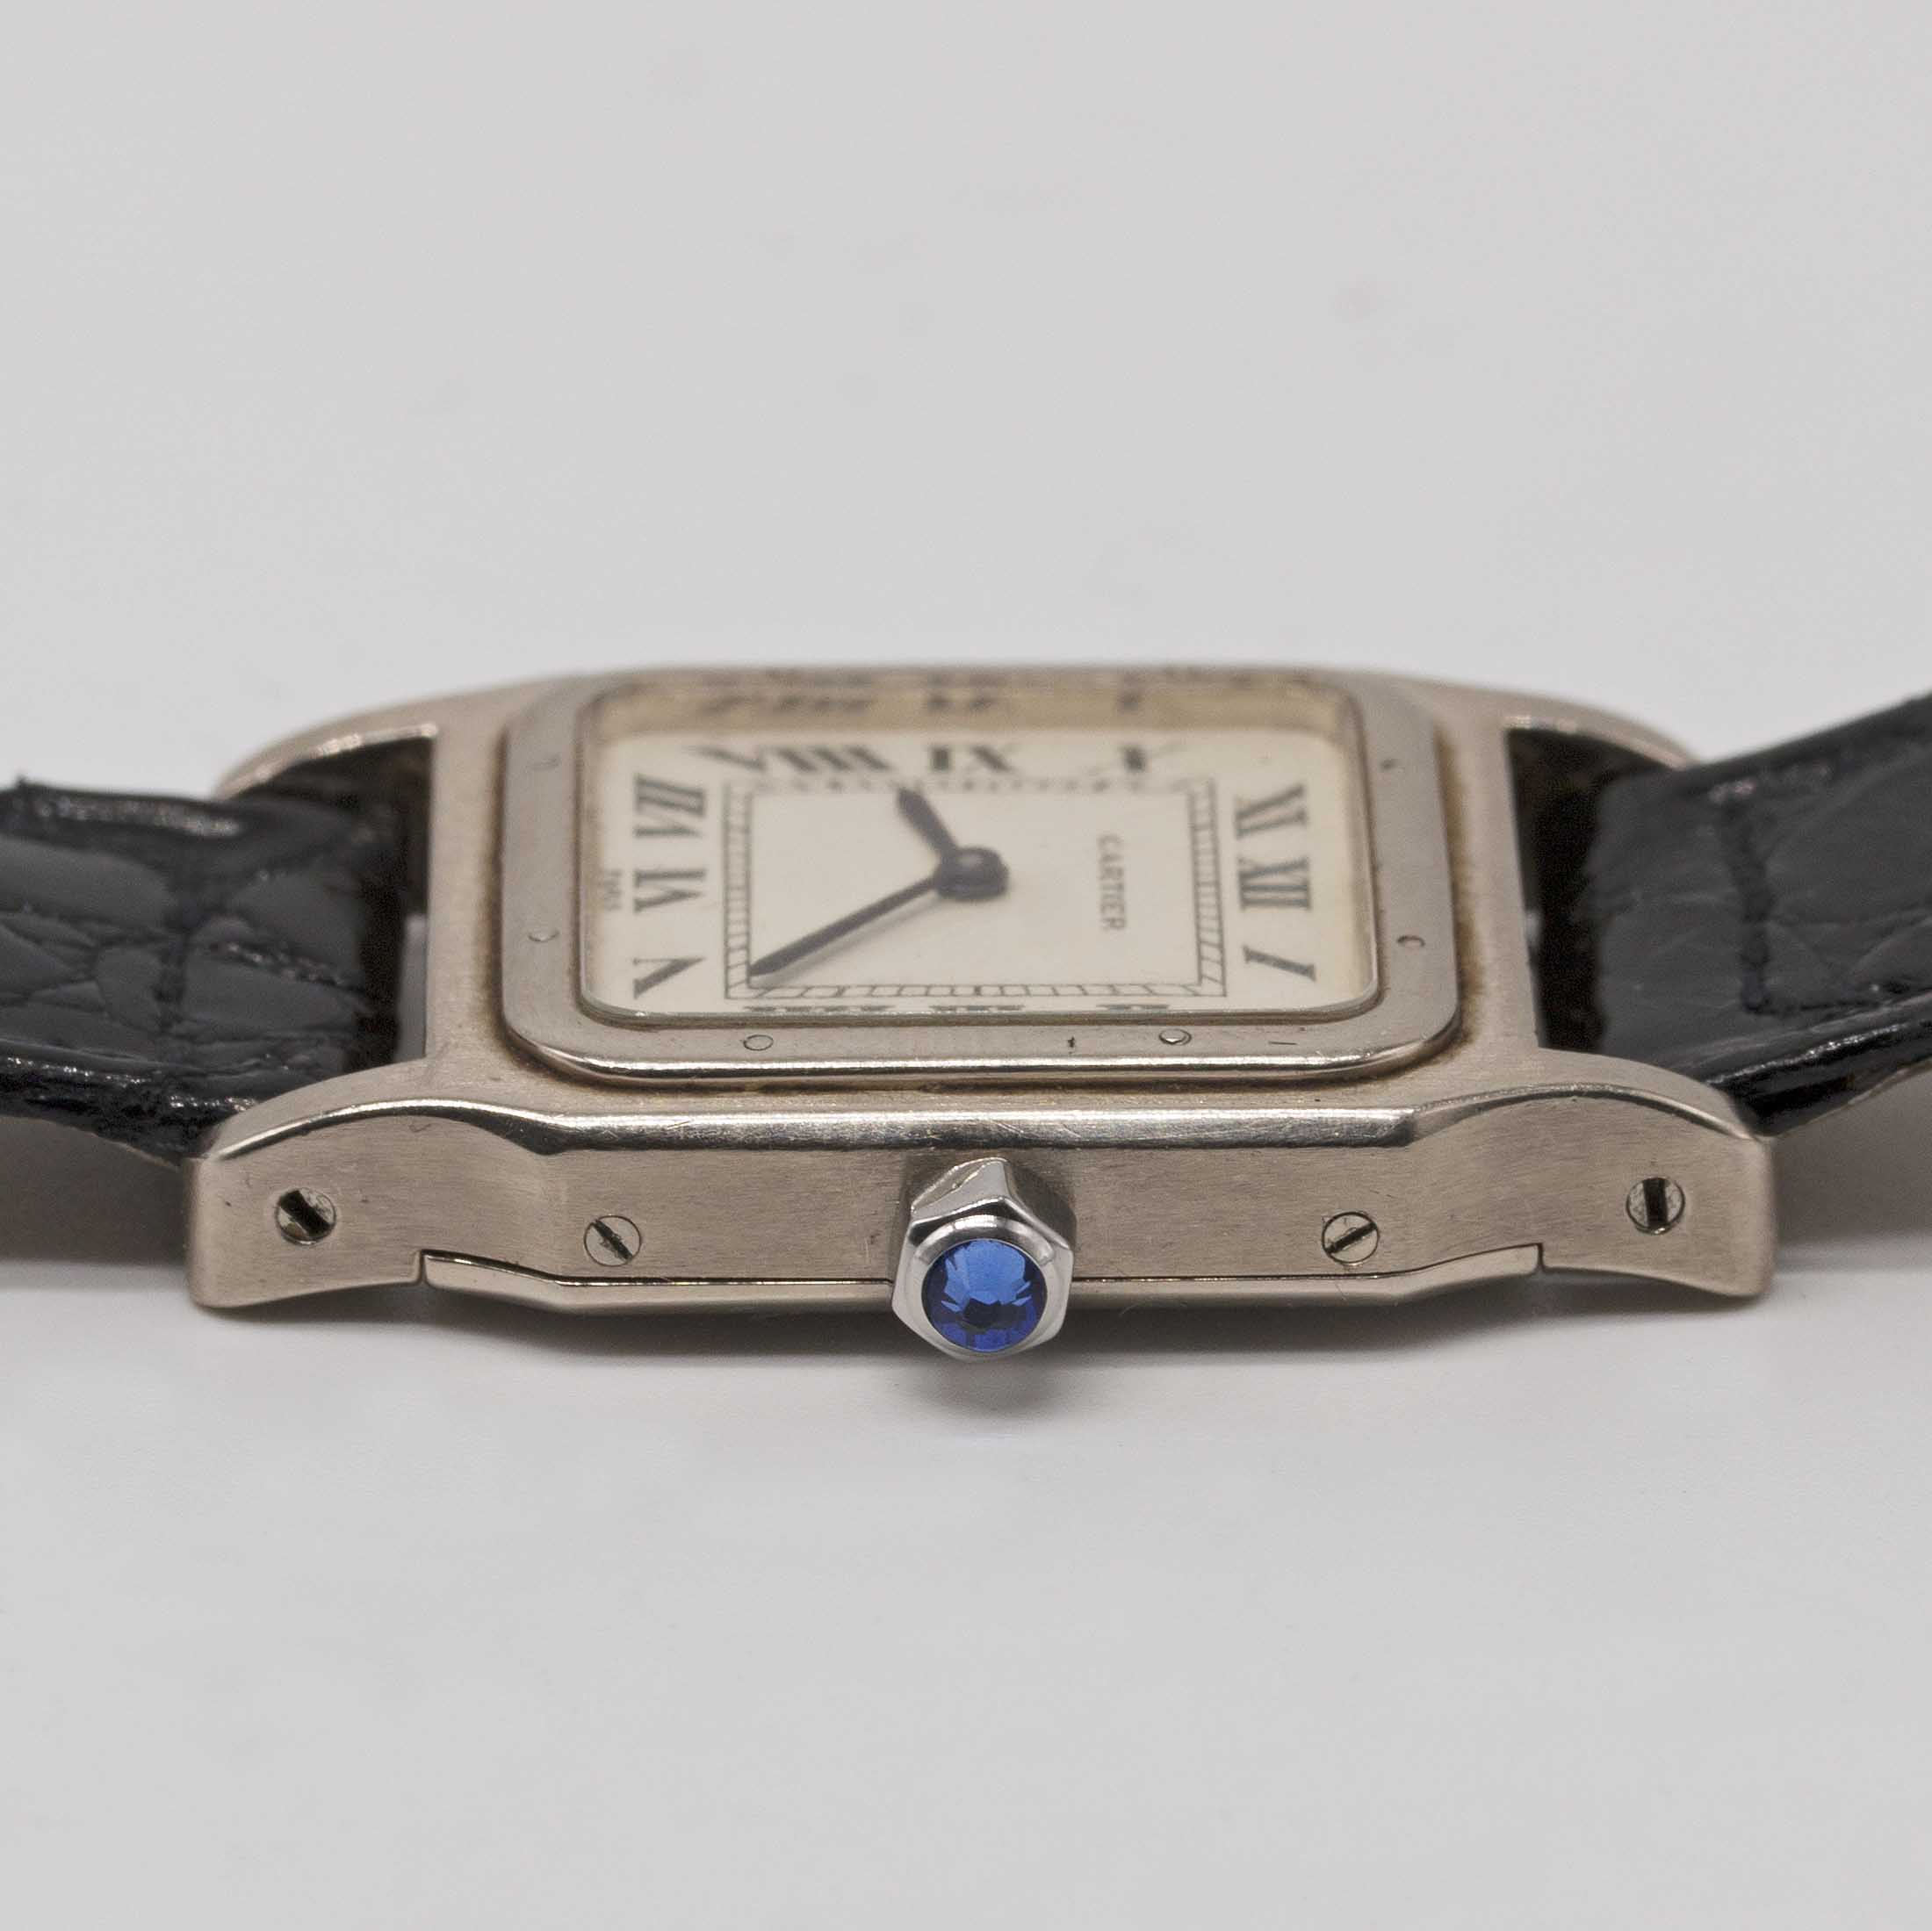 A GENTLEMAN'S SIZE 18K SOLID WHITE GOLD CARTIER SANTOS WRIST WATCH CIRCA 1980s Movement: 17J, manual - Image 9 of 11